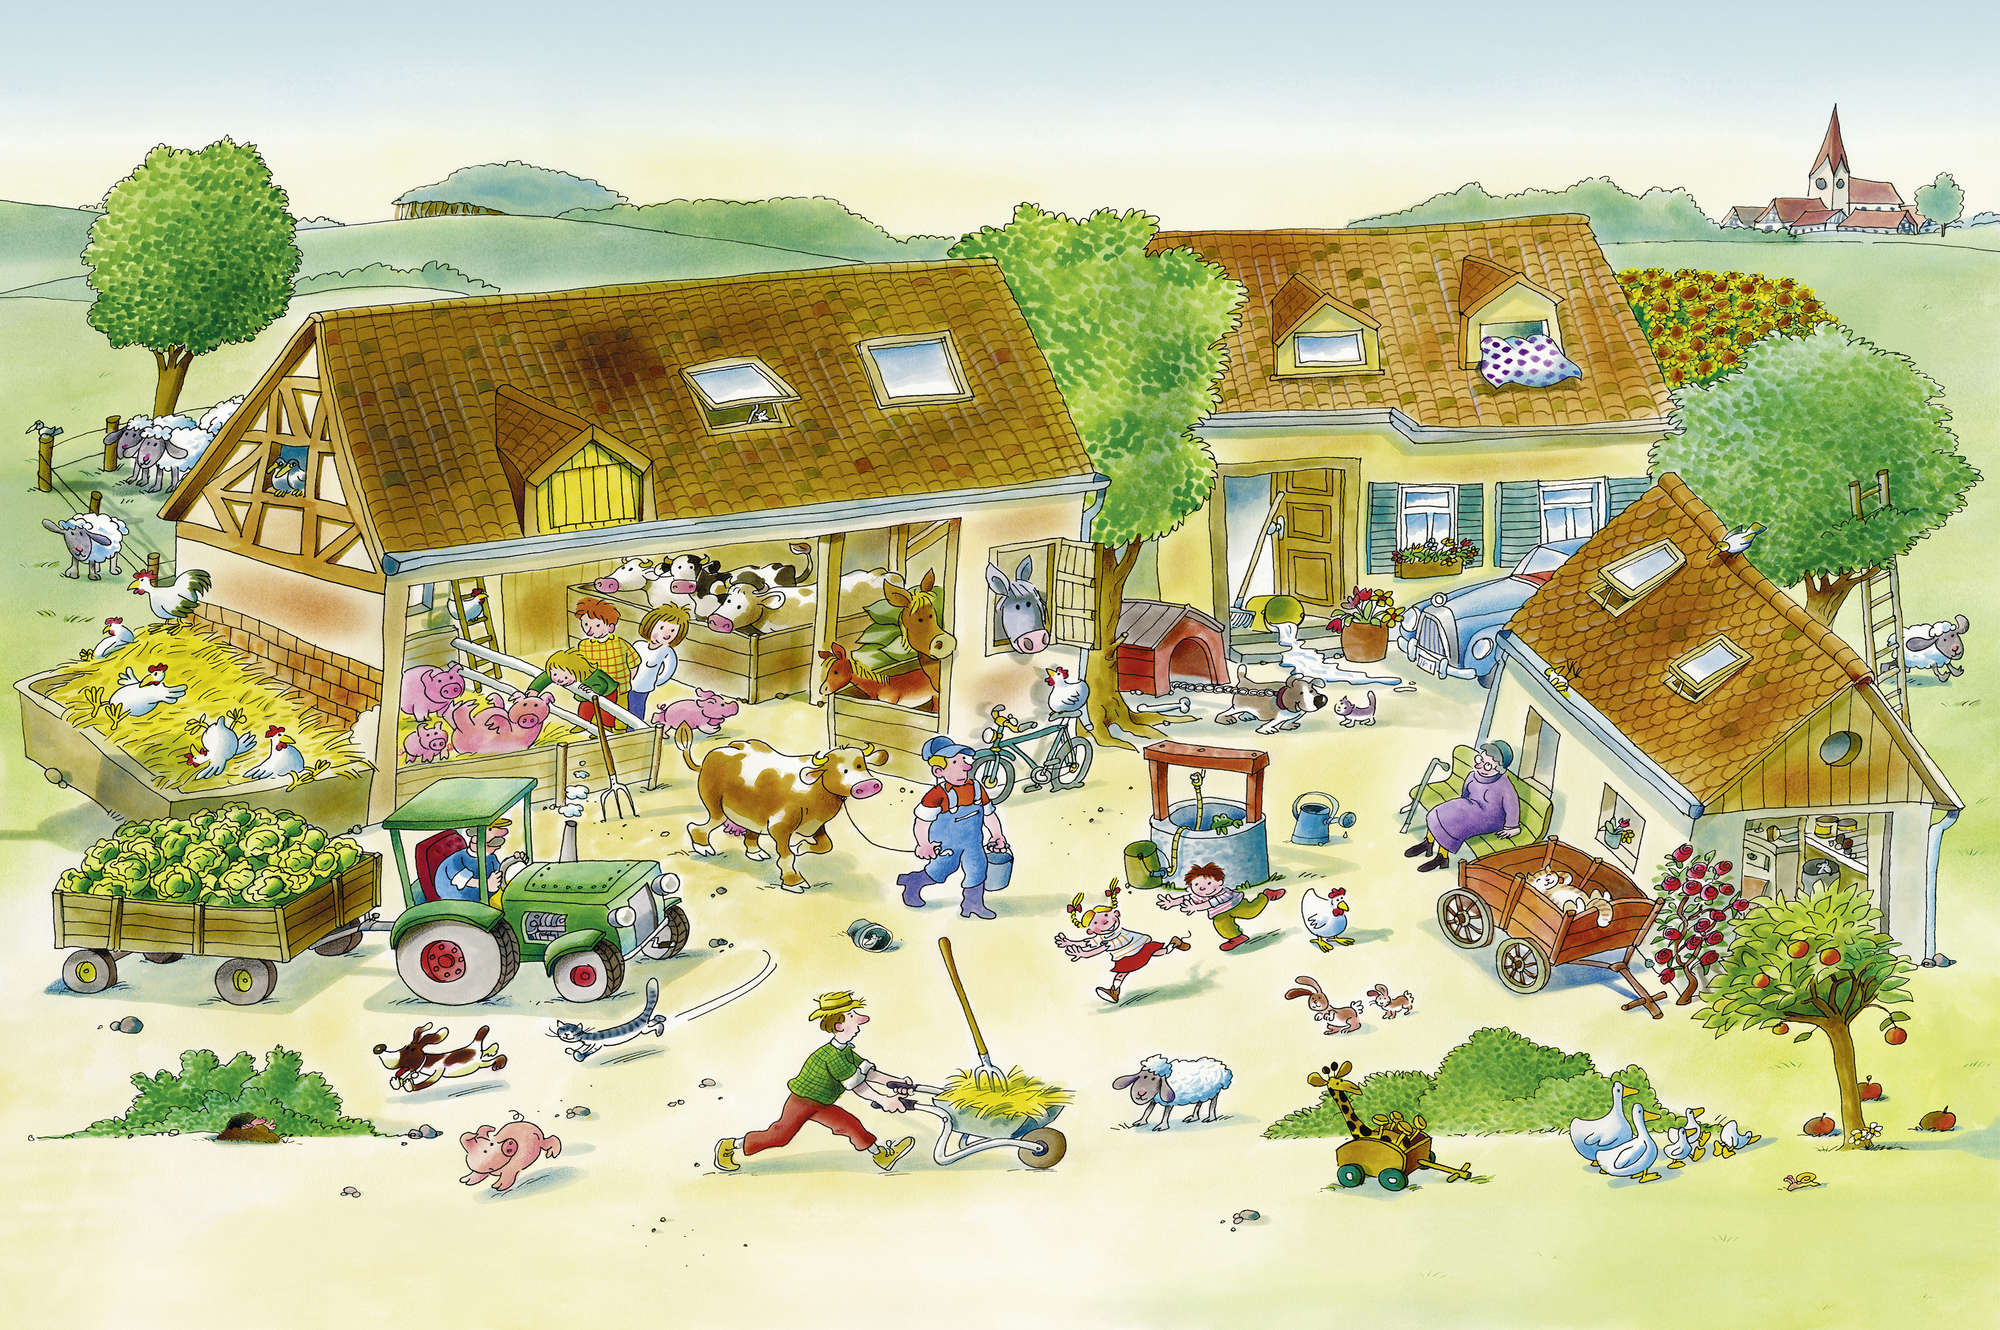             Children's mural farm with animals in brown and green on textured nonwoven
        